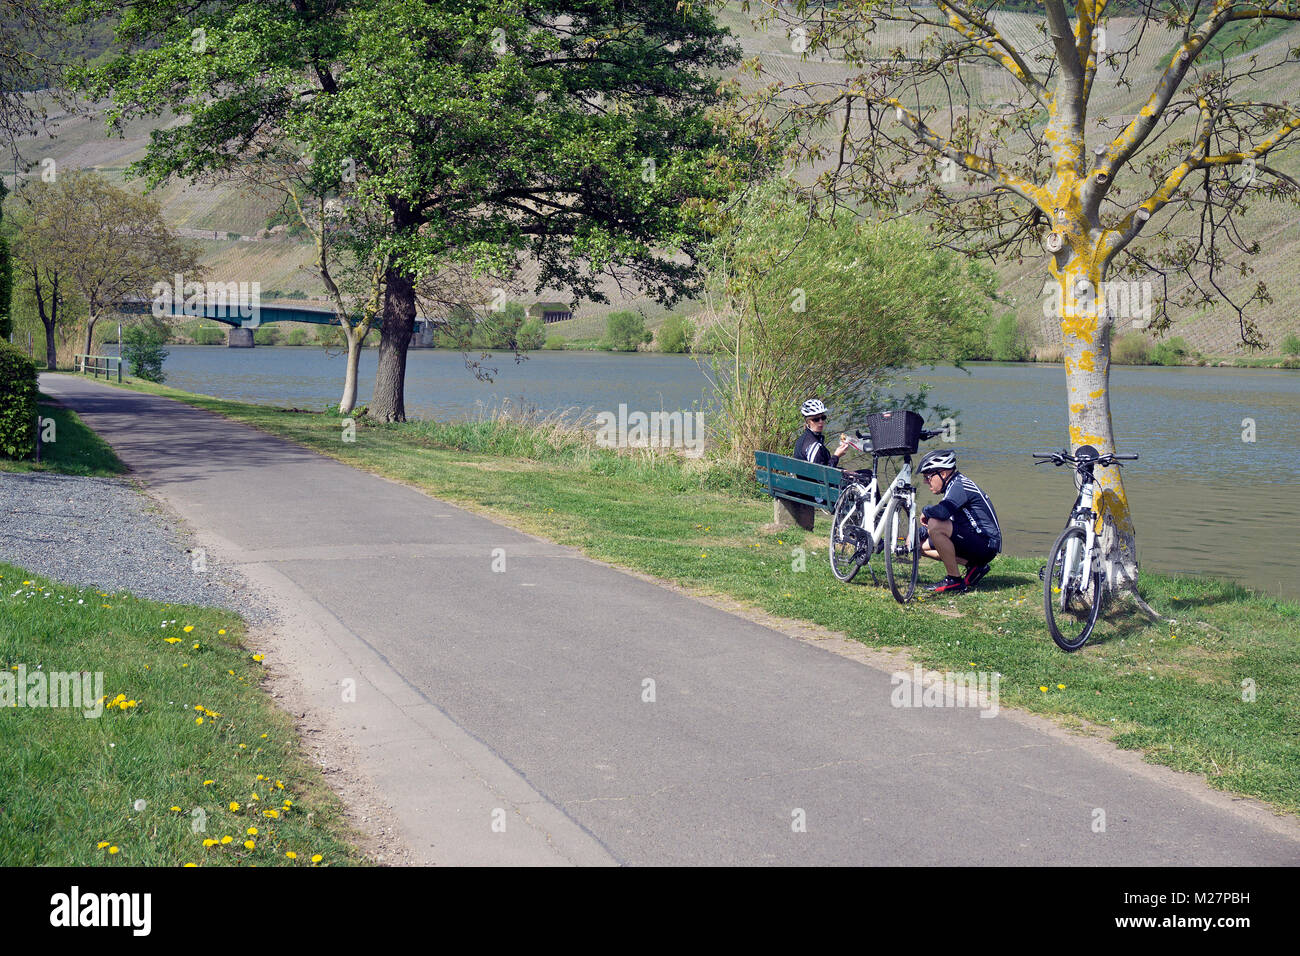 Cyclists resting at riverside of Moselle river, Piesport, Moselle river, Rhineland-Palatinate, Germany, Europe Stock Photo